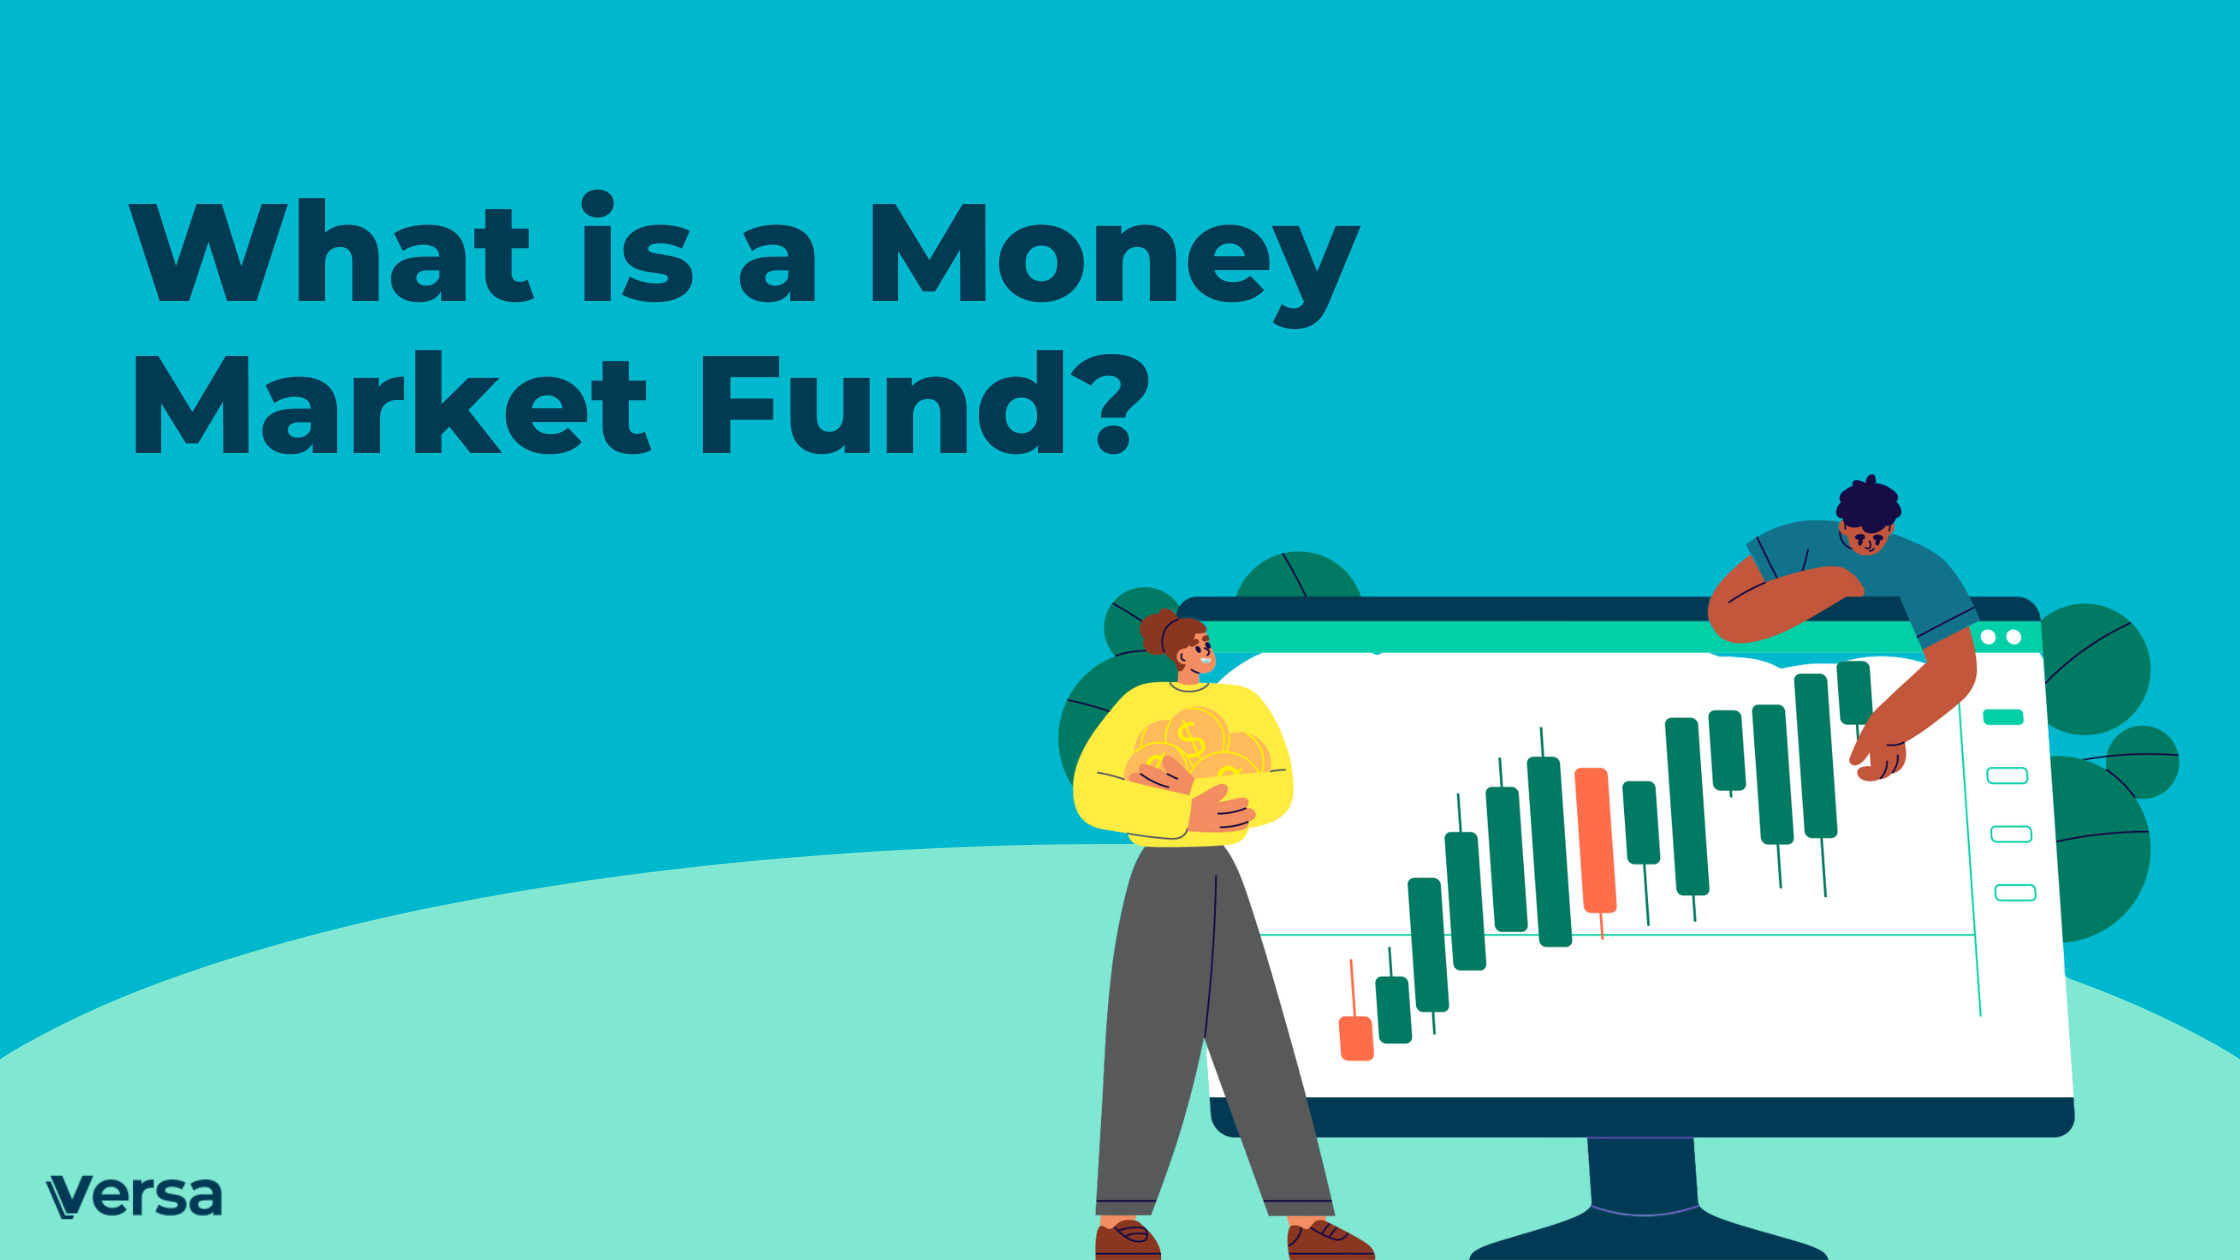 Here’s What No One Tells You About Money Market Funds